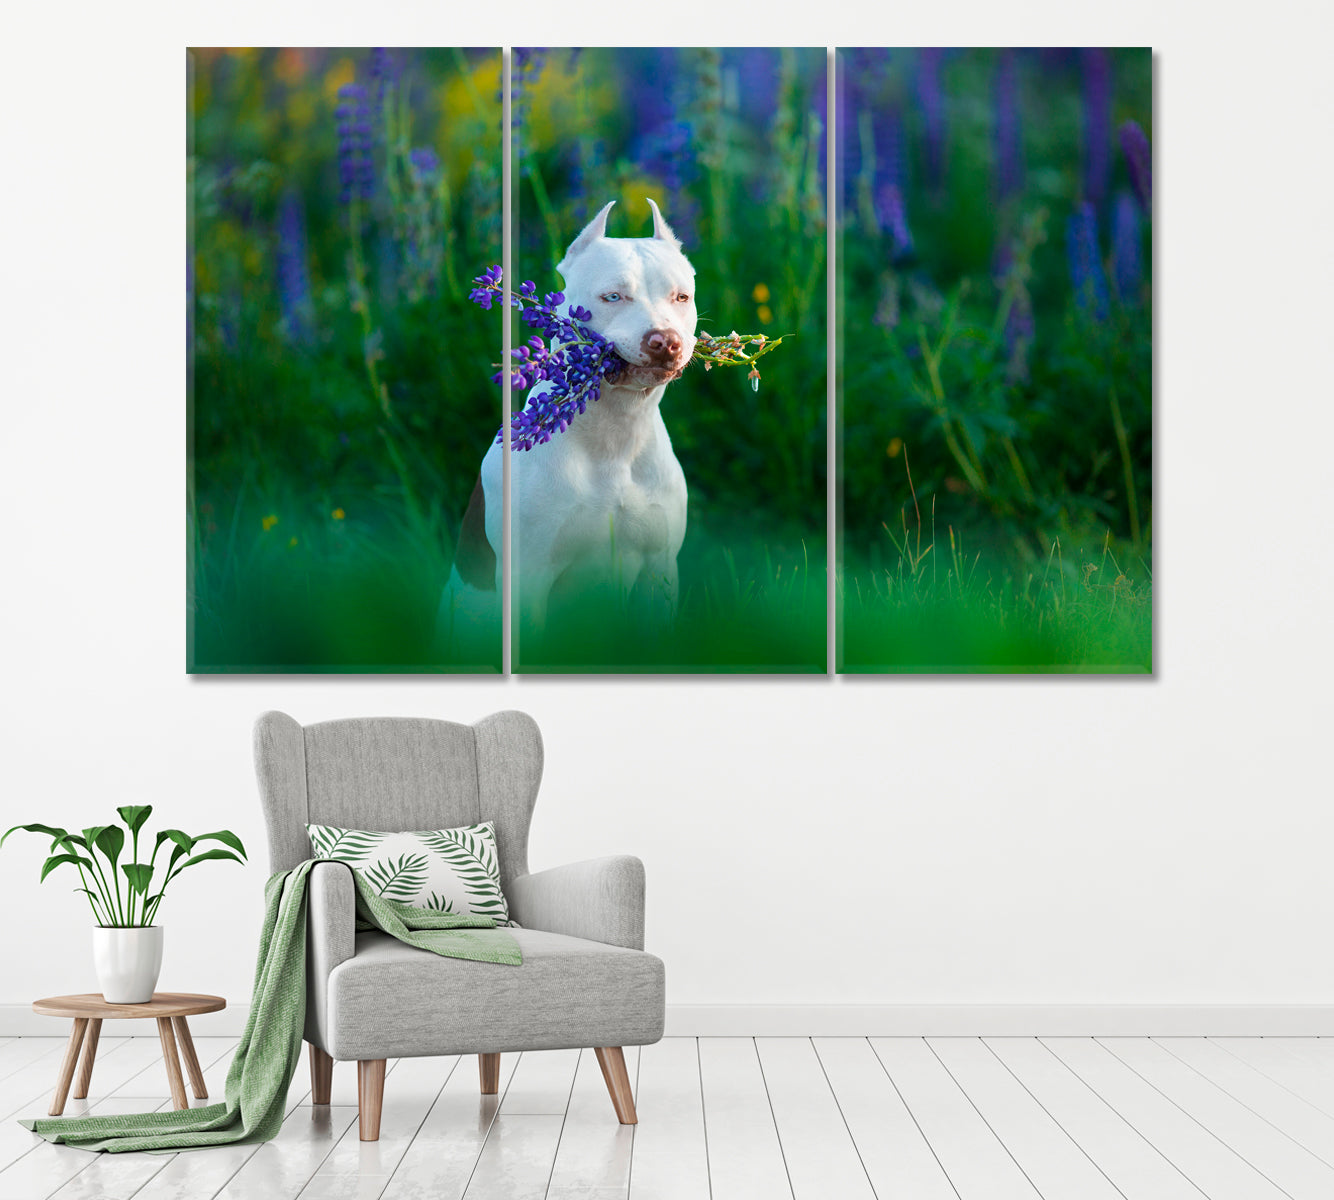 White Pitbull with Bouquet of Flowers Canvas Print ArtLexy 3 Panels 36"x24" inches 